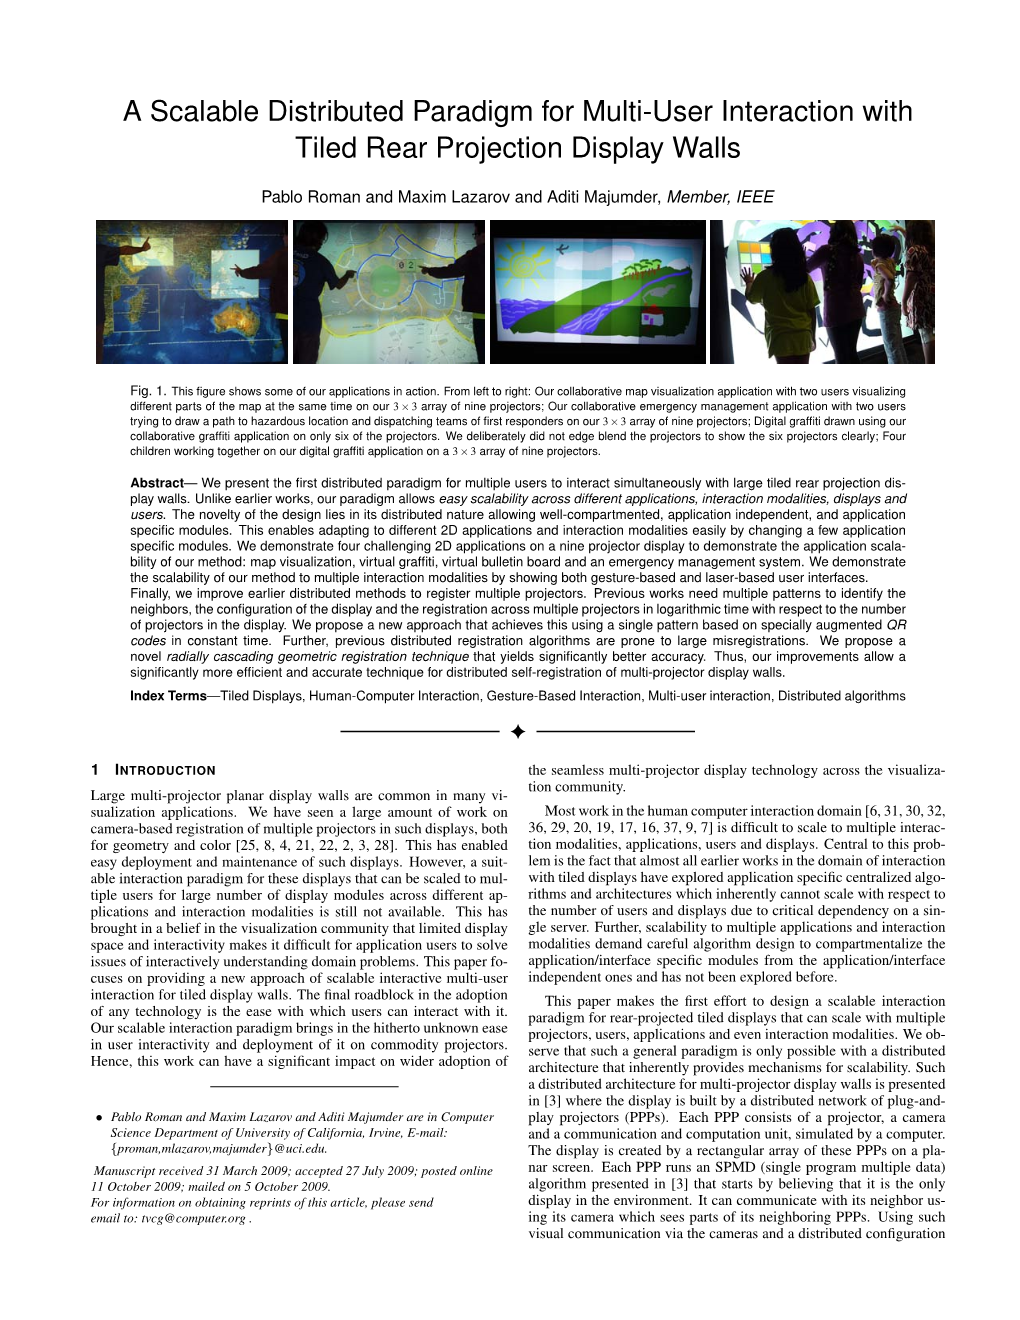 A Scalable Distributed Paradigm for Multi-User Interaction with Tiled Rear Projection Display Walls